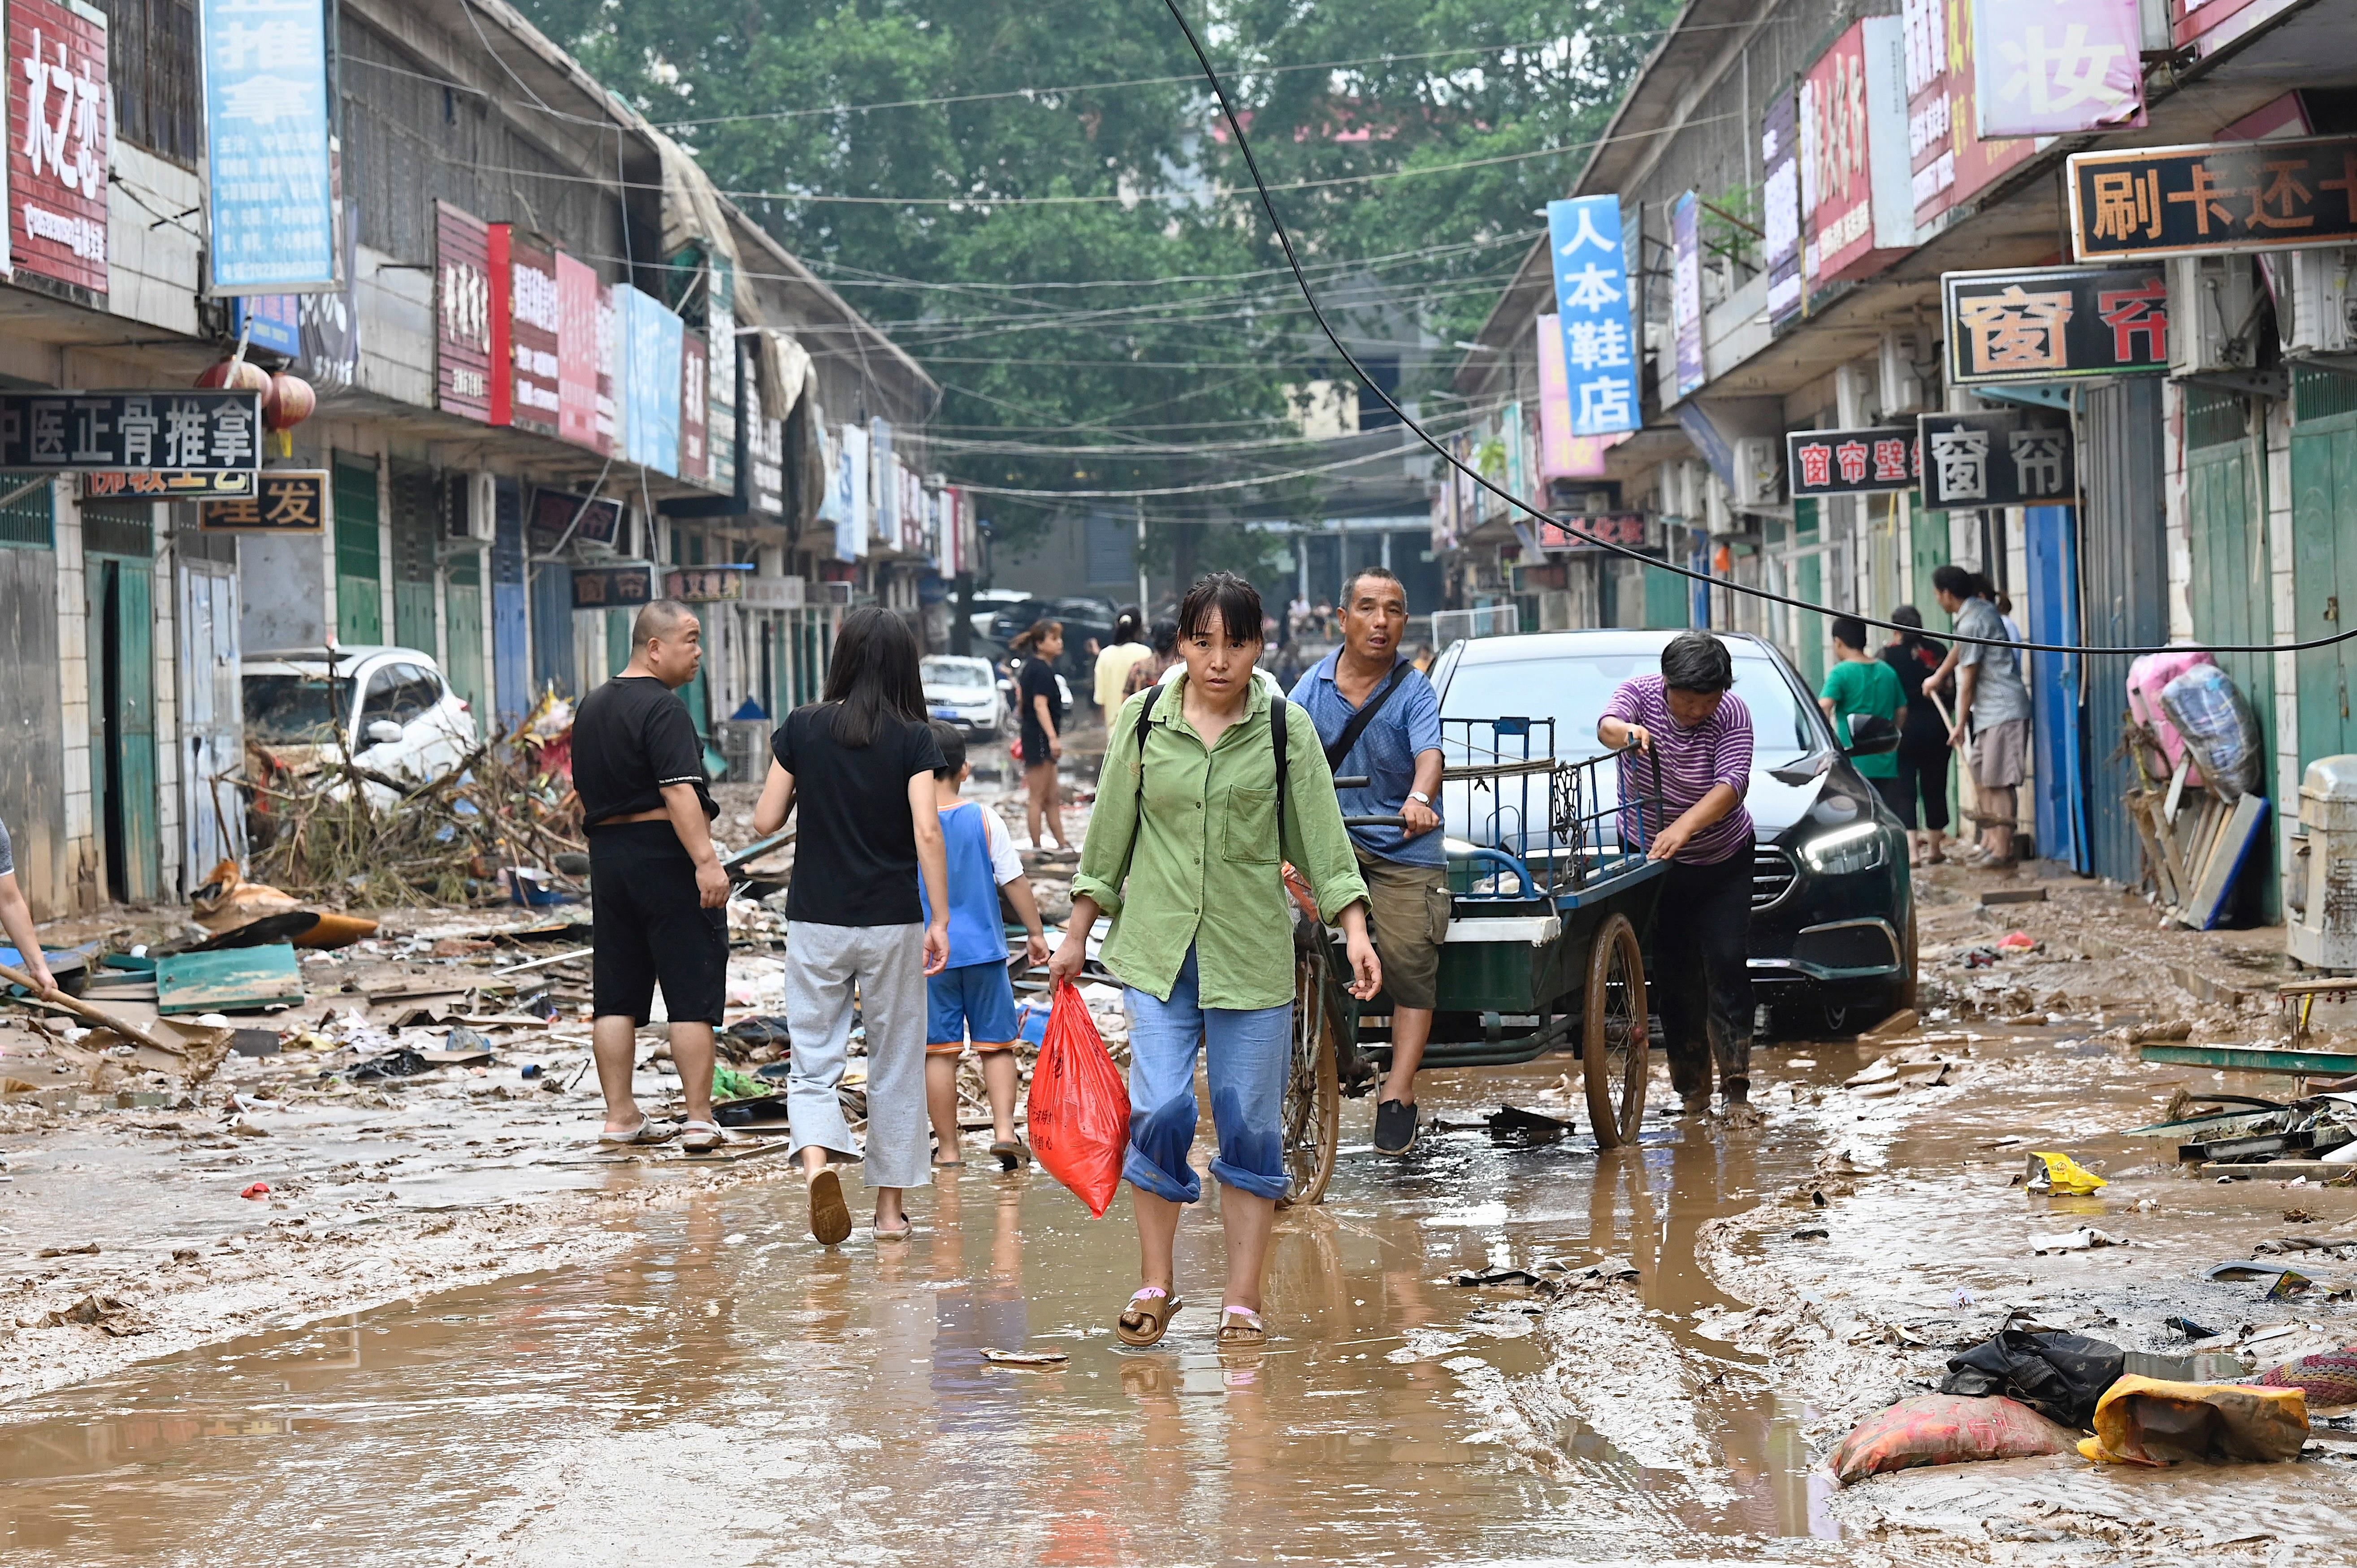 A person carrying a bag through a flooded street in Gongyi city on July 22.